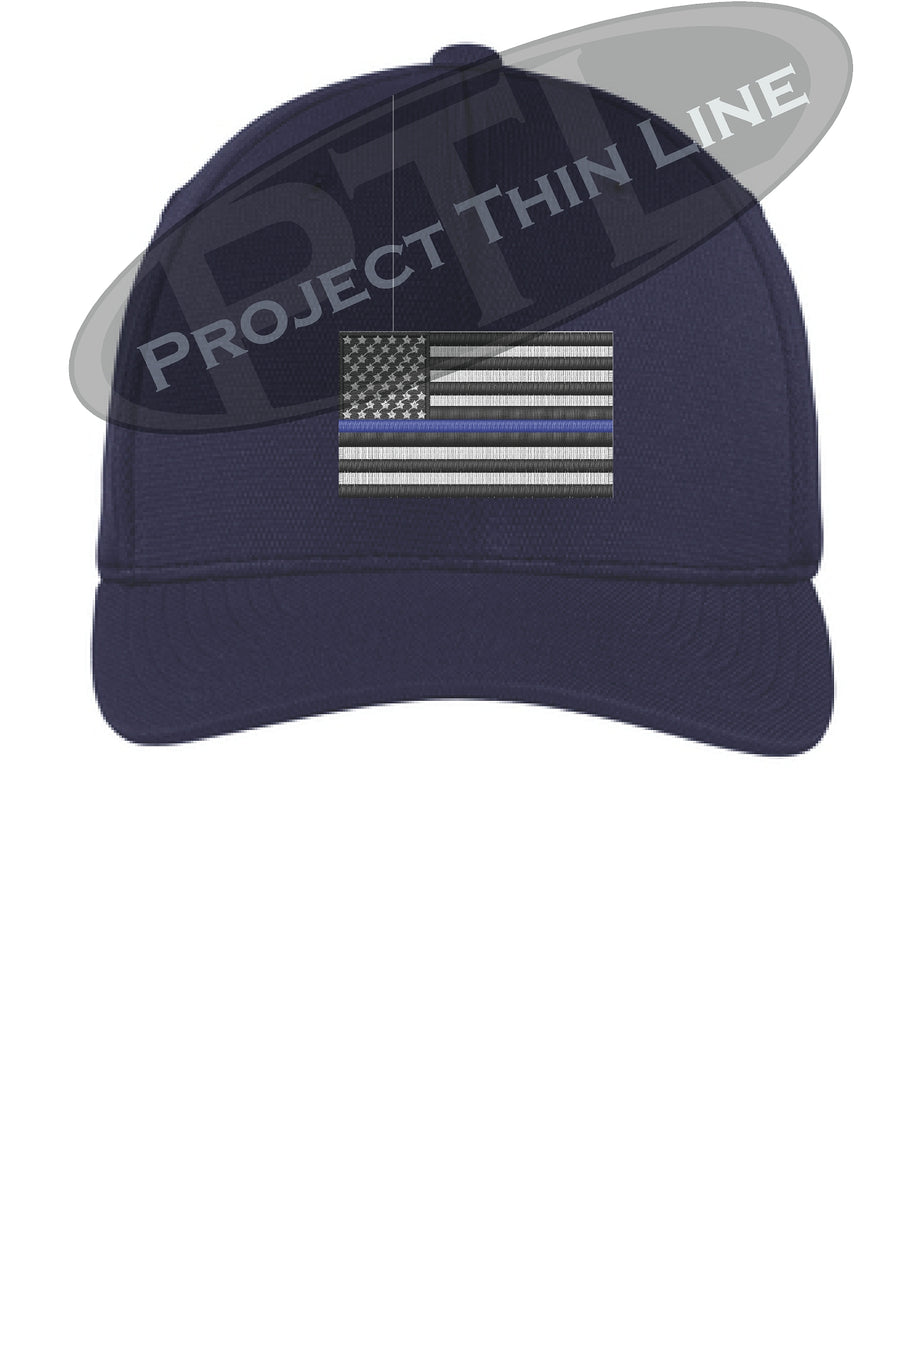 Embroidered Thin Blue American Flag Flex Fit Fitted Baseball Hat